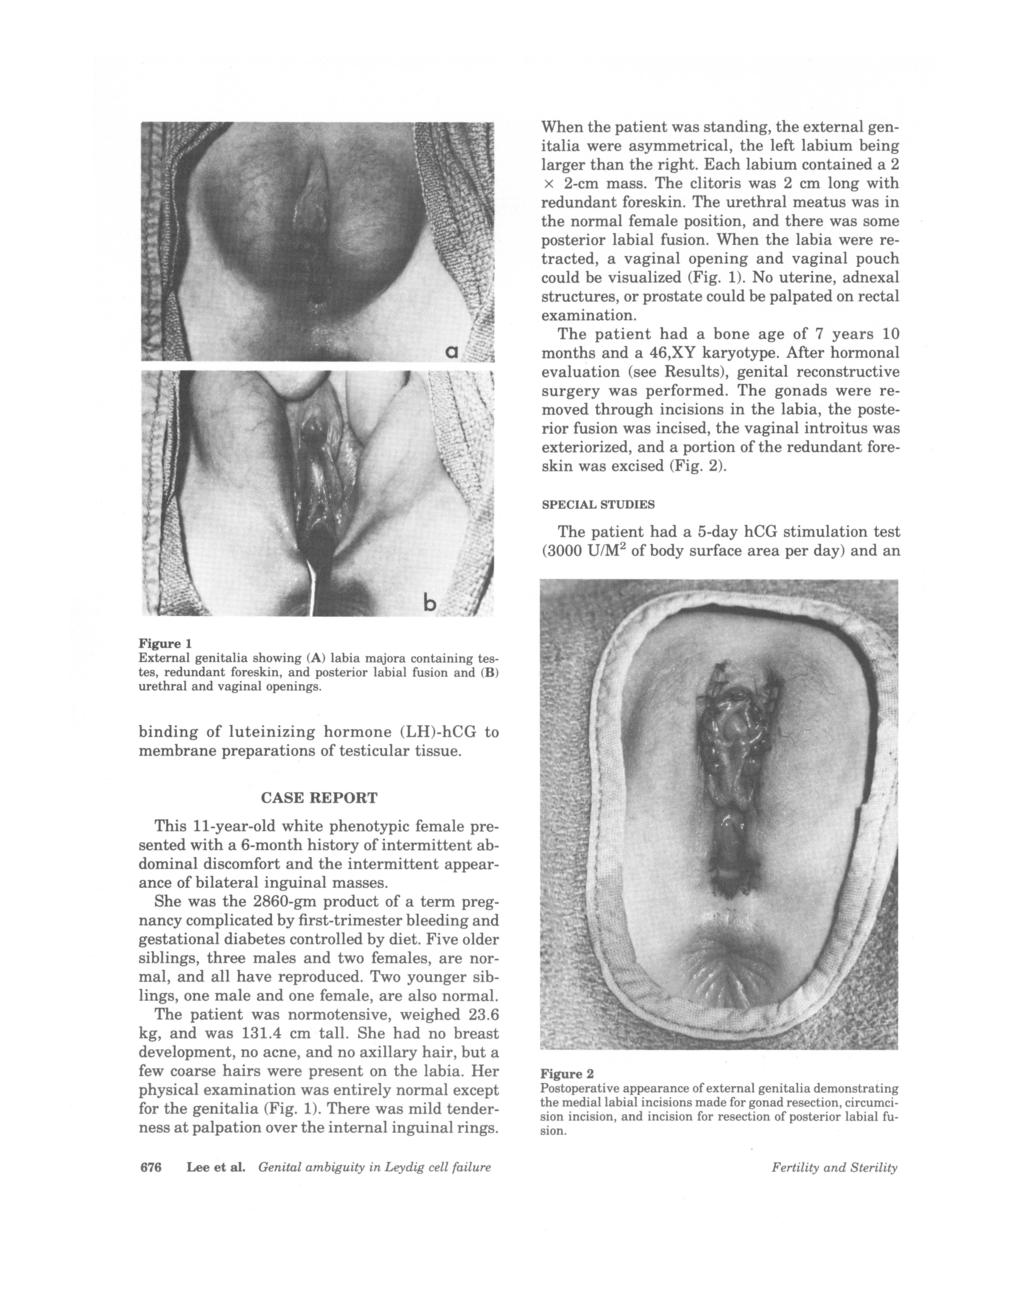 When the patient was standing, the external genitalia were asymmetrical, the left labium being larger than the right. Each labium contained a 2 x 2-cm mass.